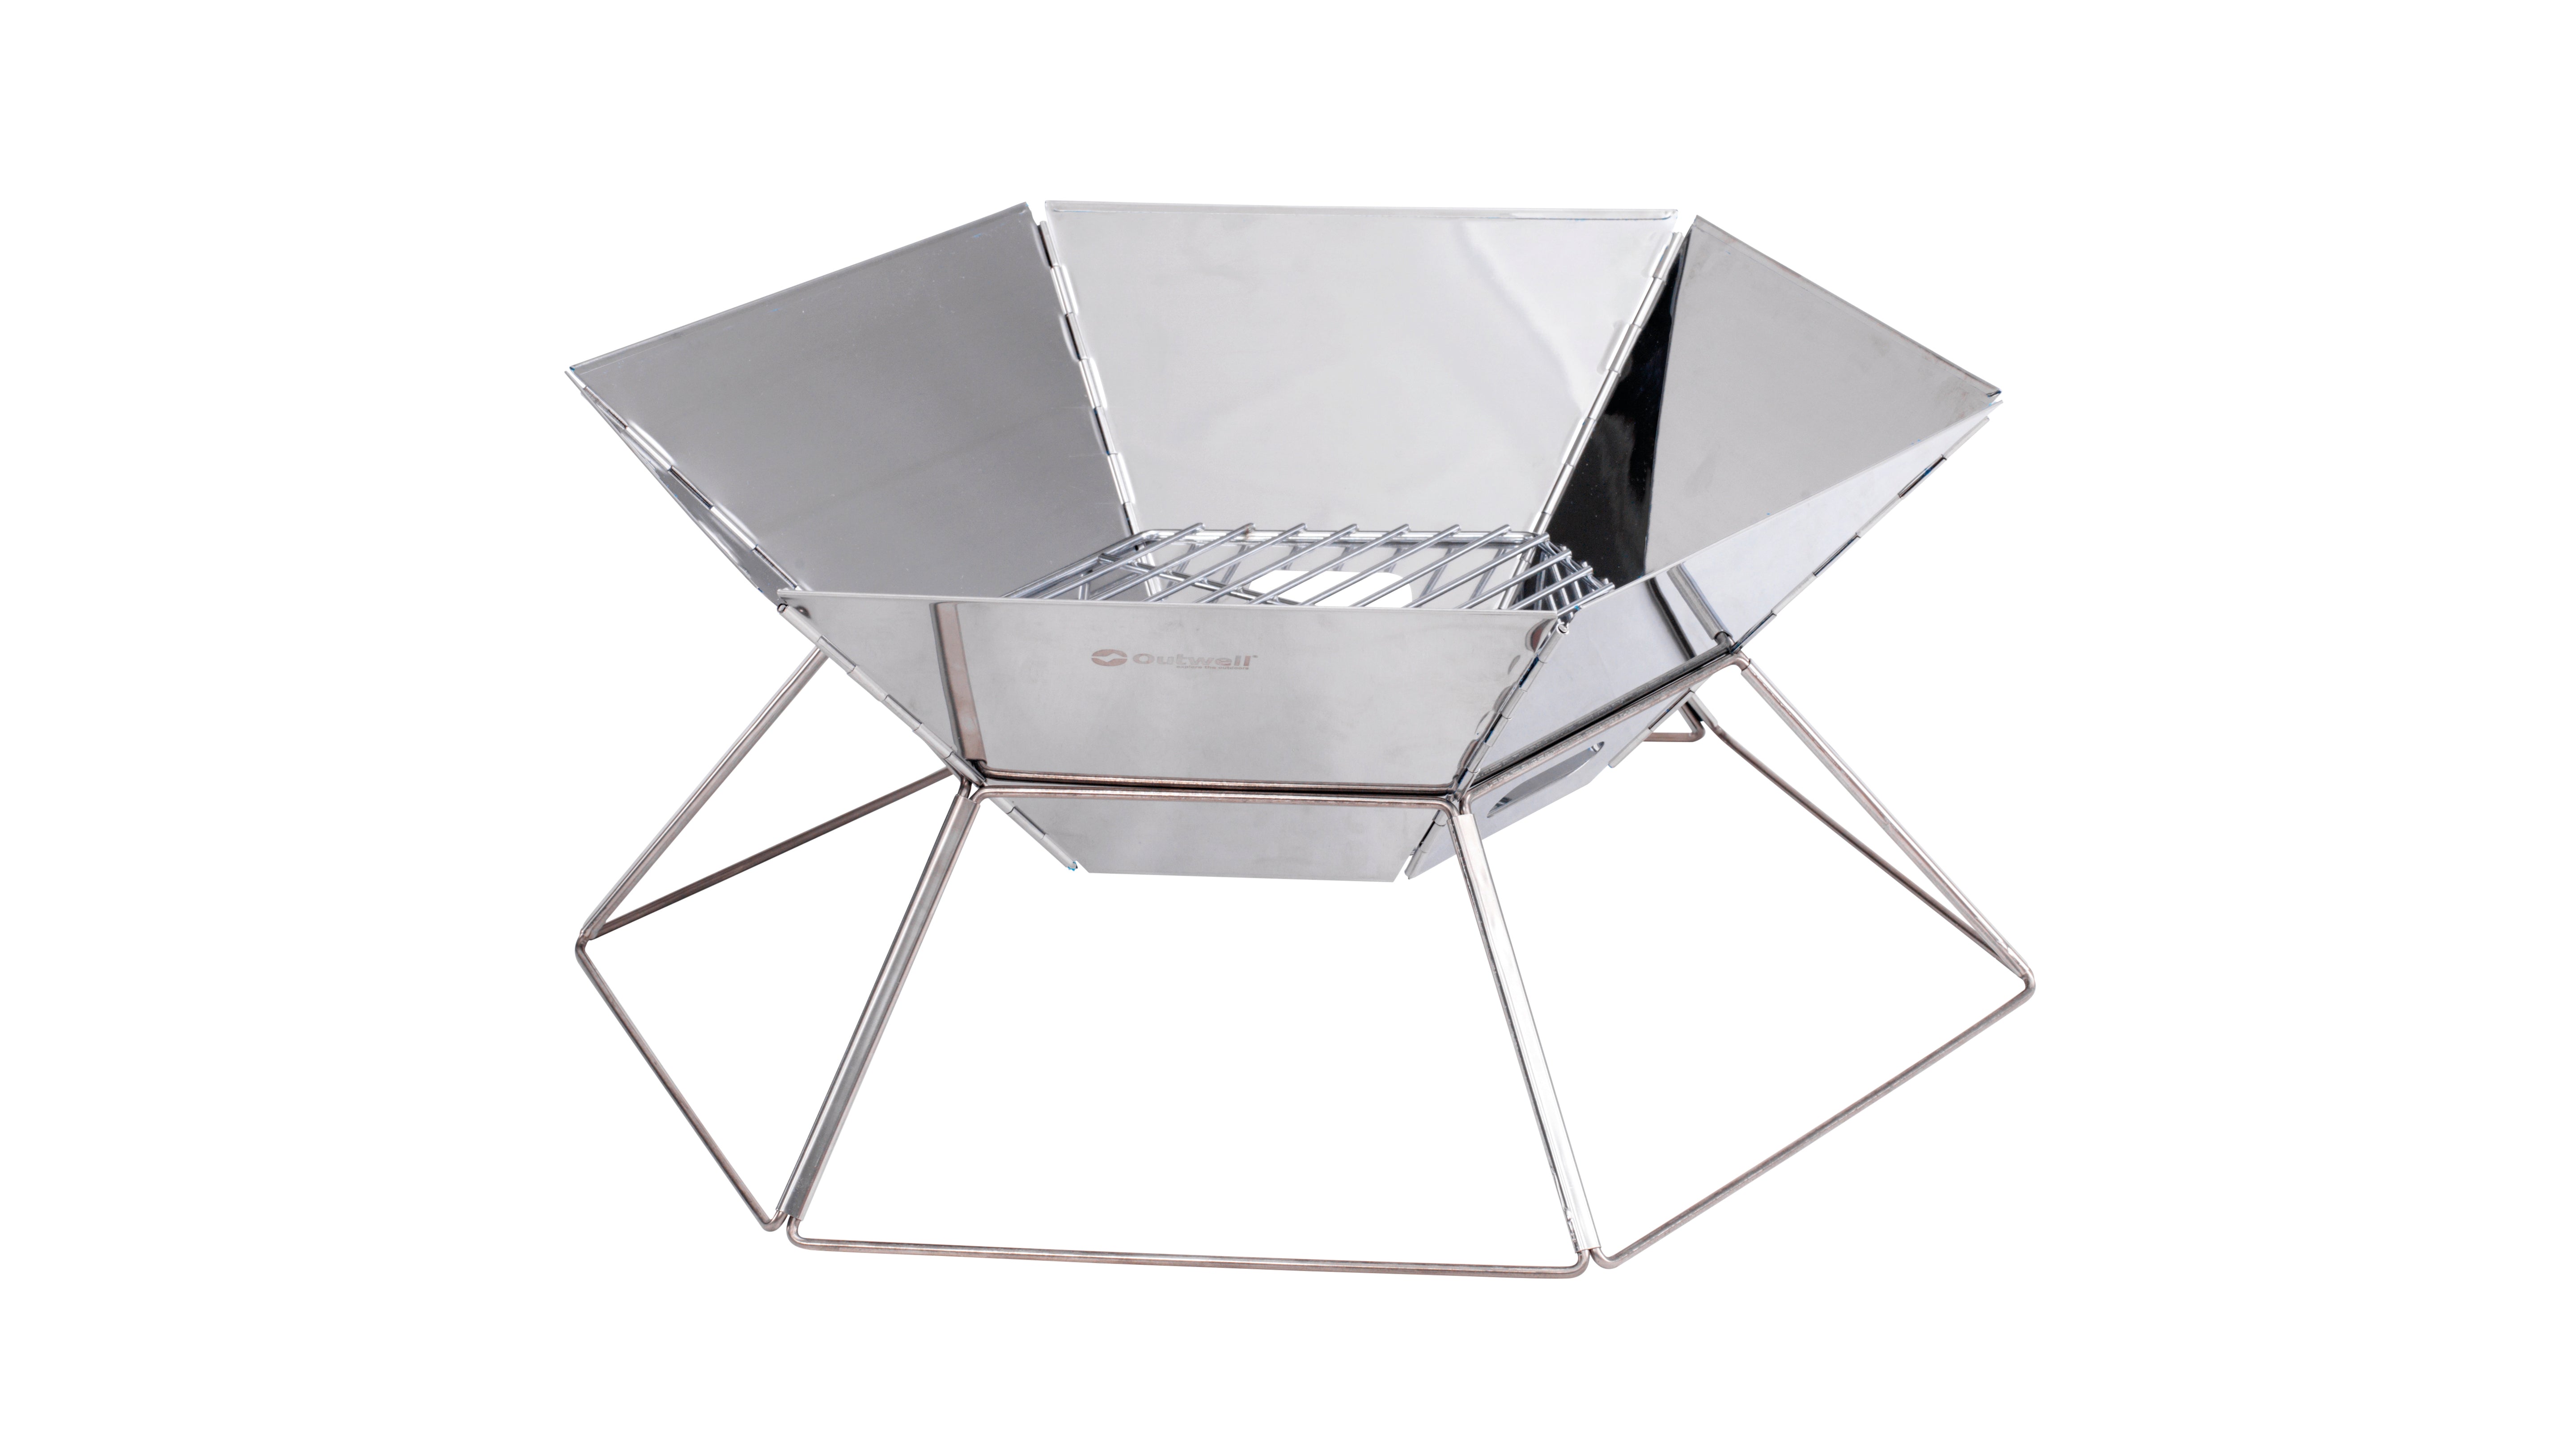 Outwell Cantal Fire Pit